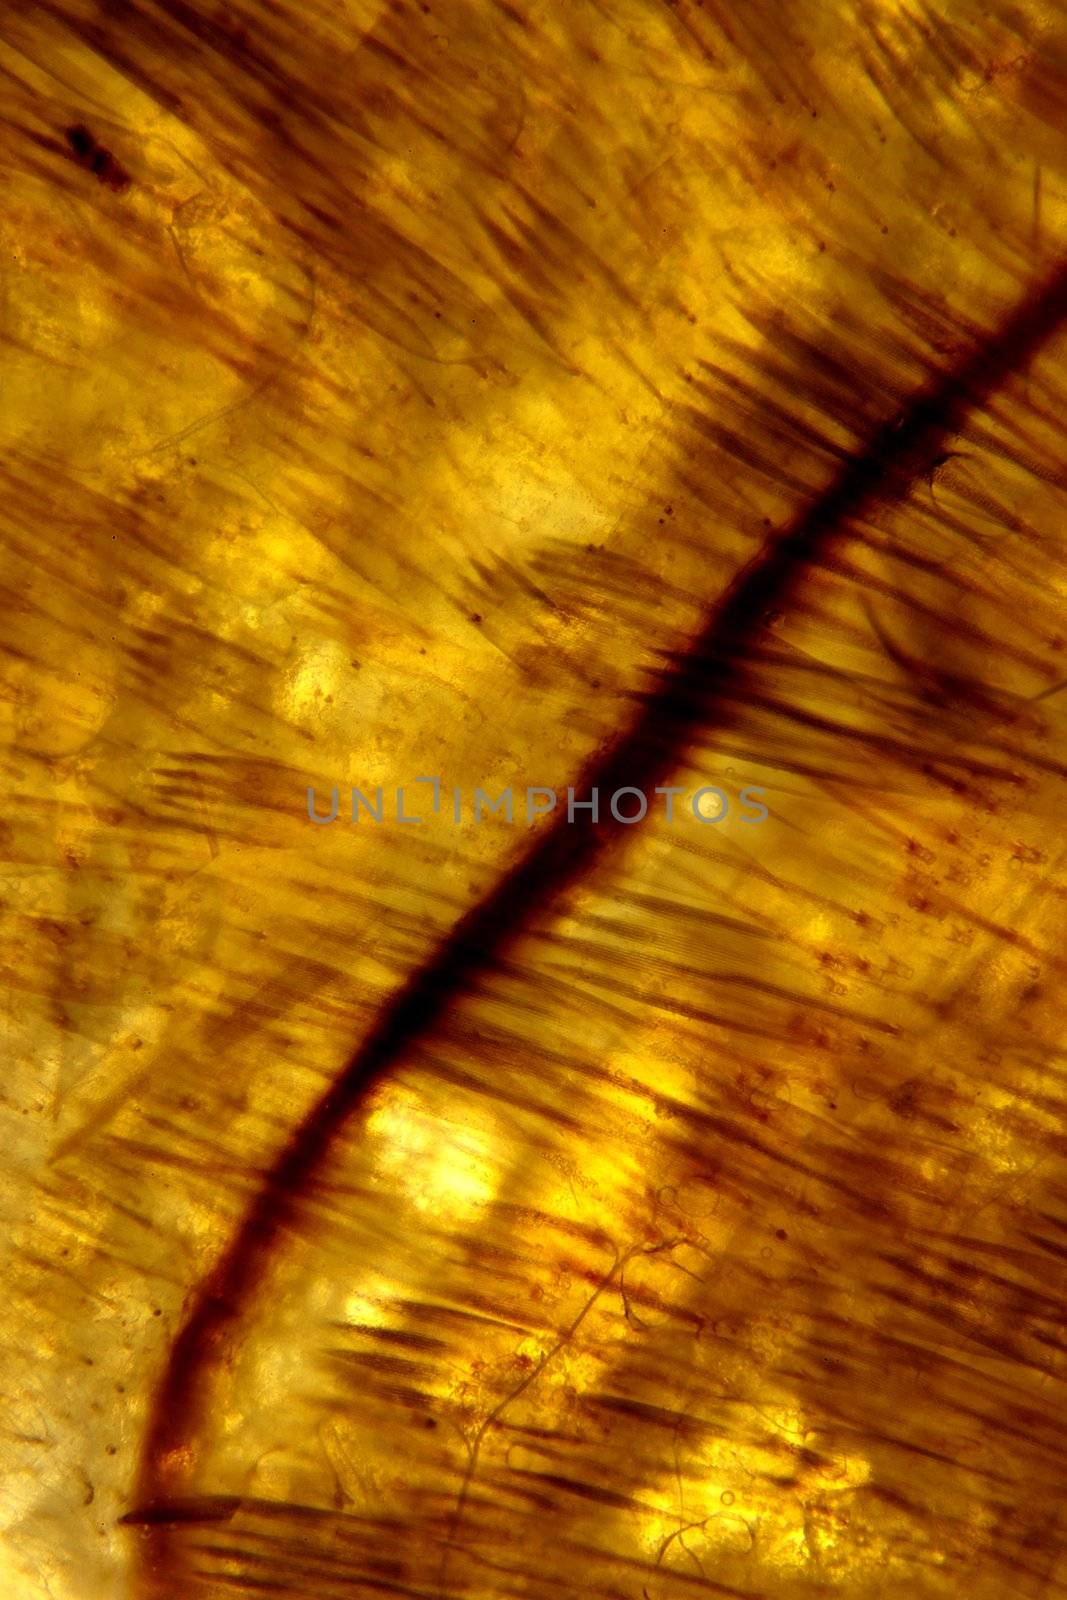 Micrograph of moth insect  using compound microscope. Magnification 400X. Brightfield illumination